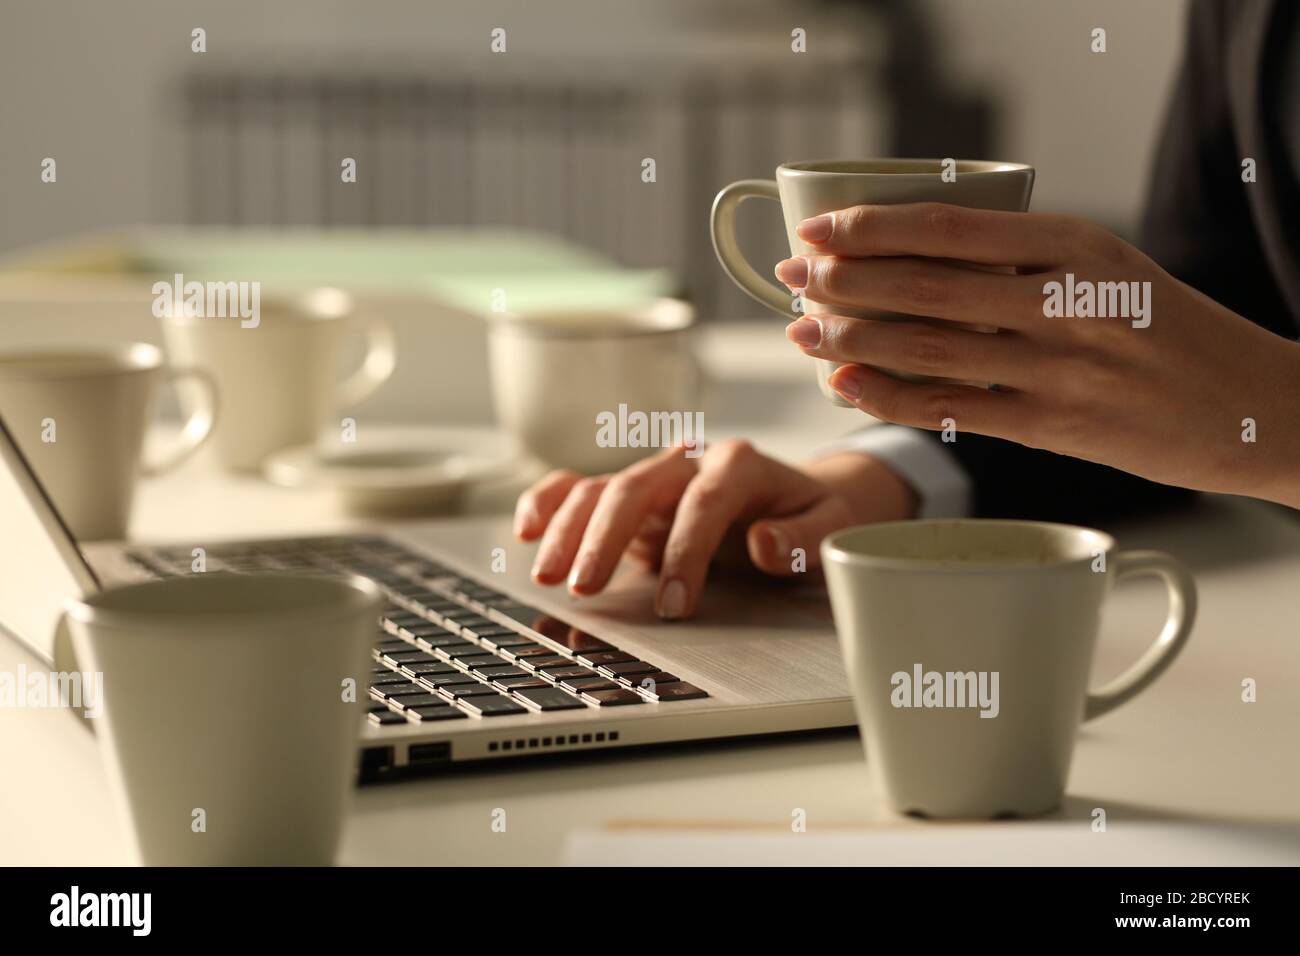 Close up of overworked executive woman hands working late hours wih multiple coffee cups in the office at night Stock Photo